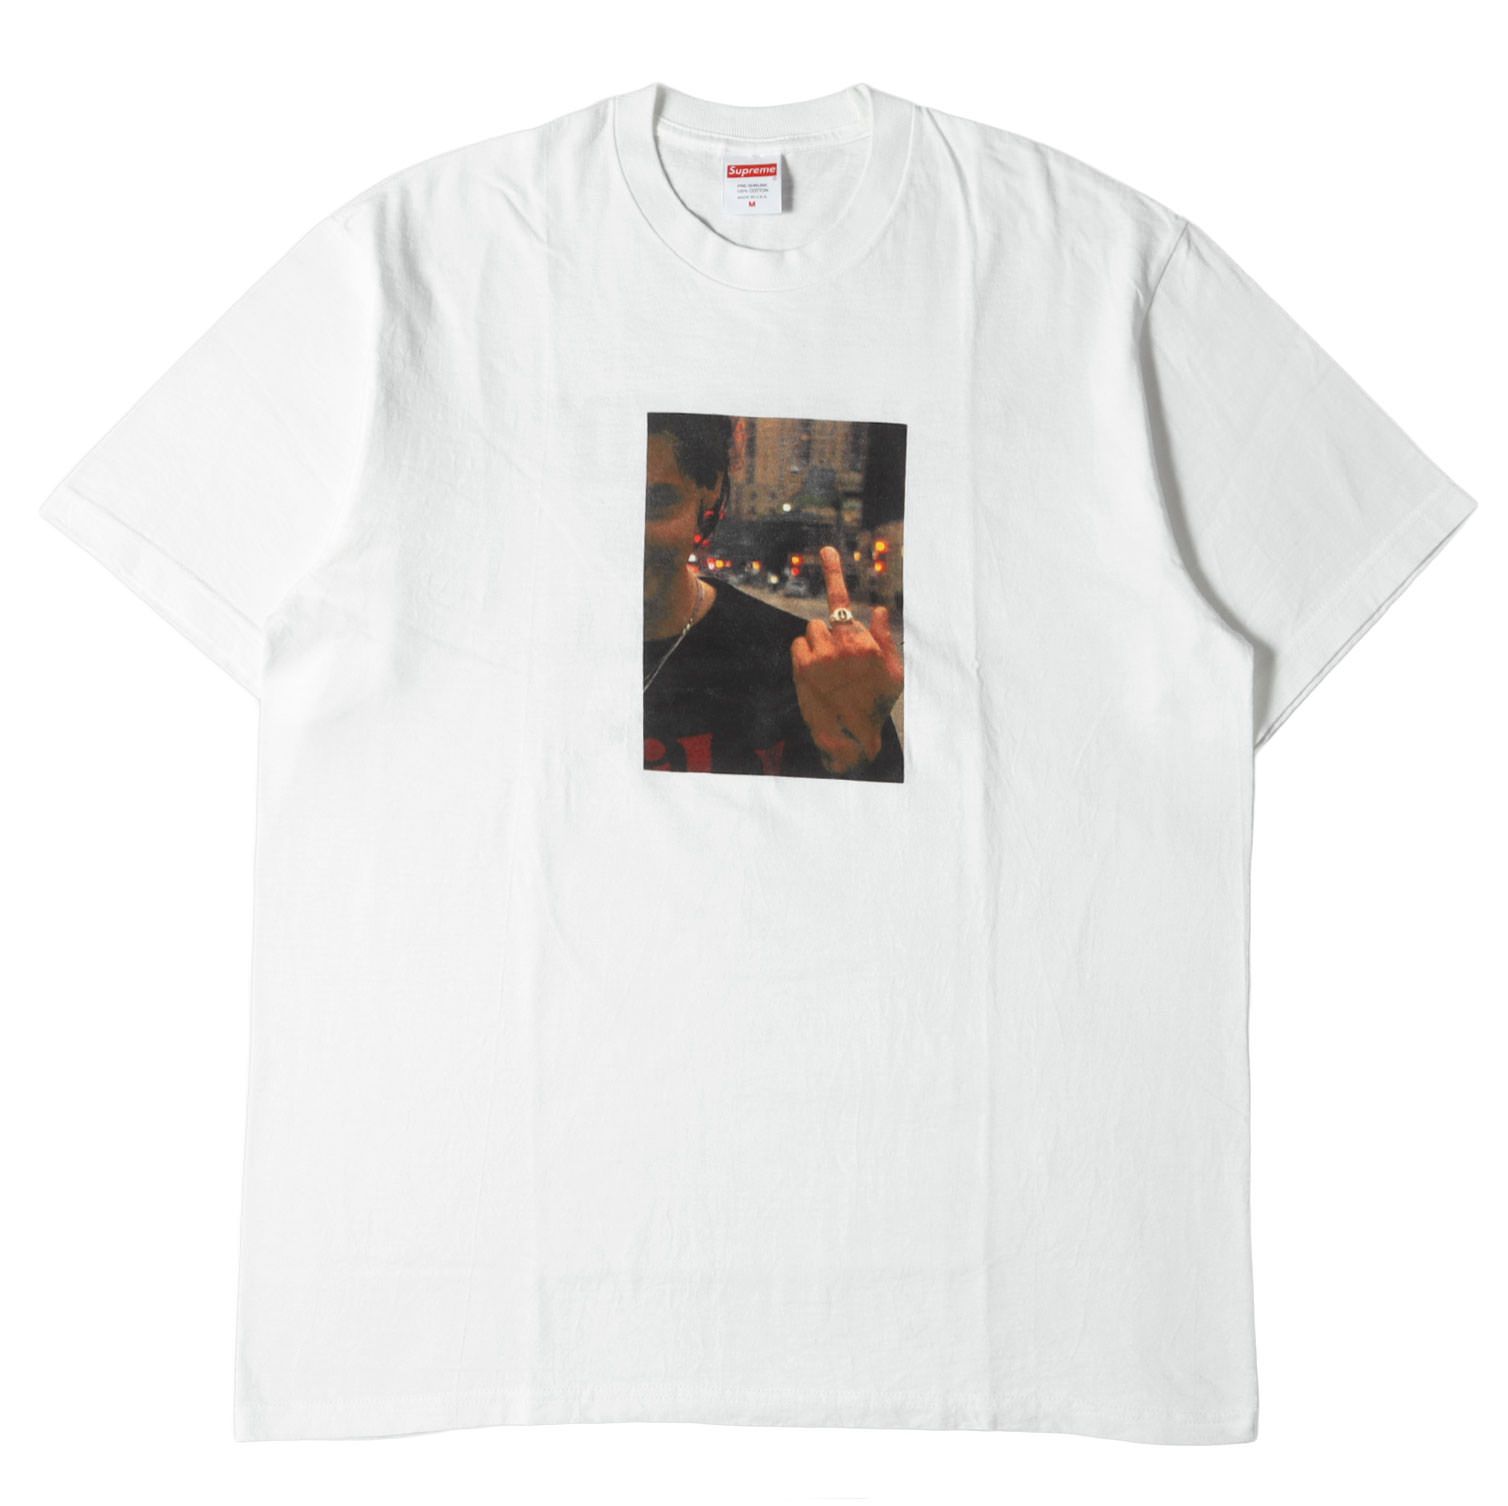 supreme シュプリーム　blessed tee tシャツ